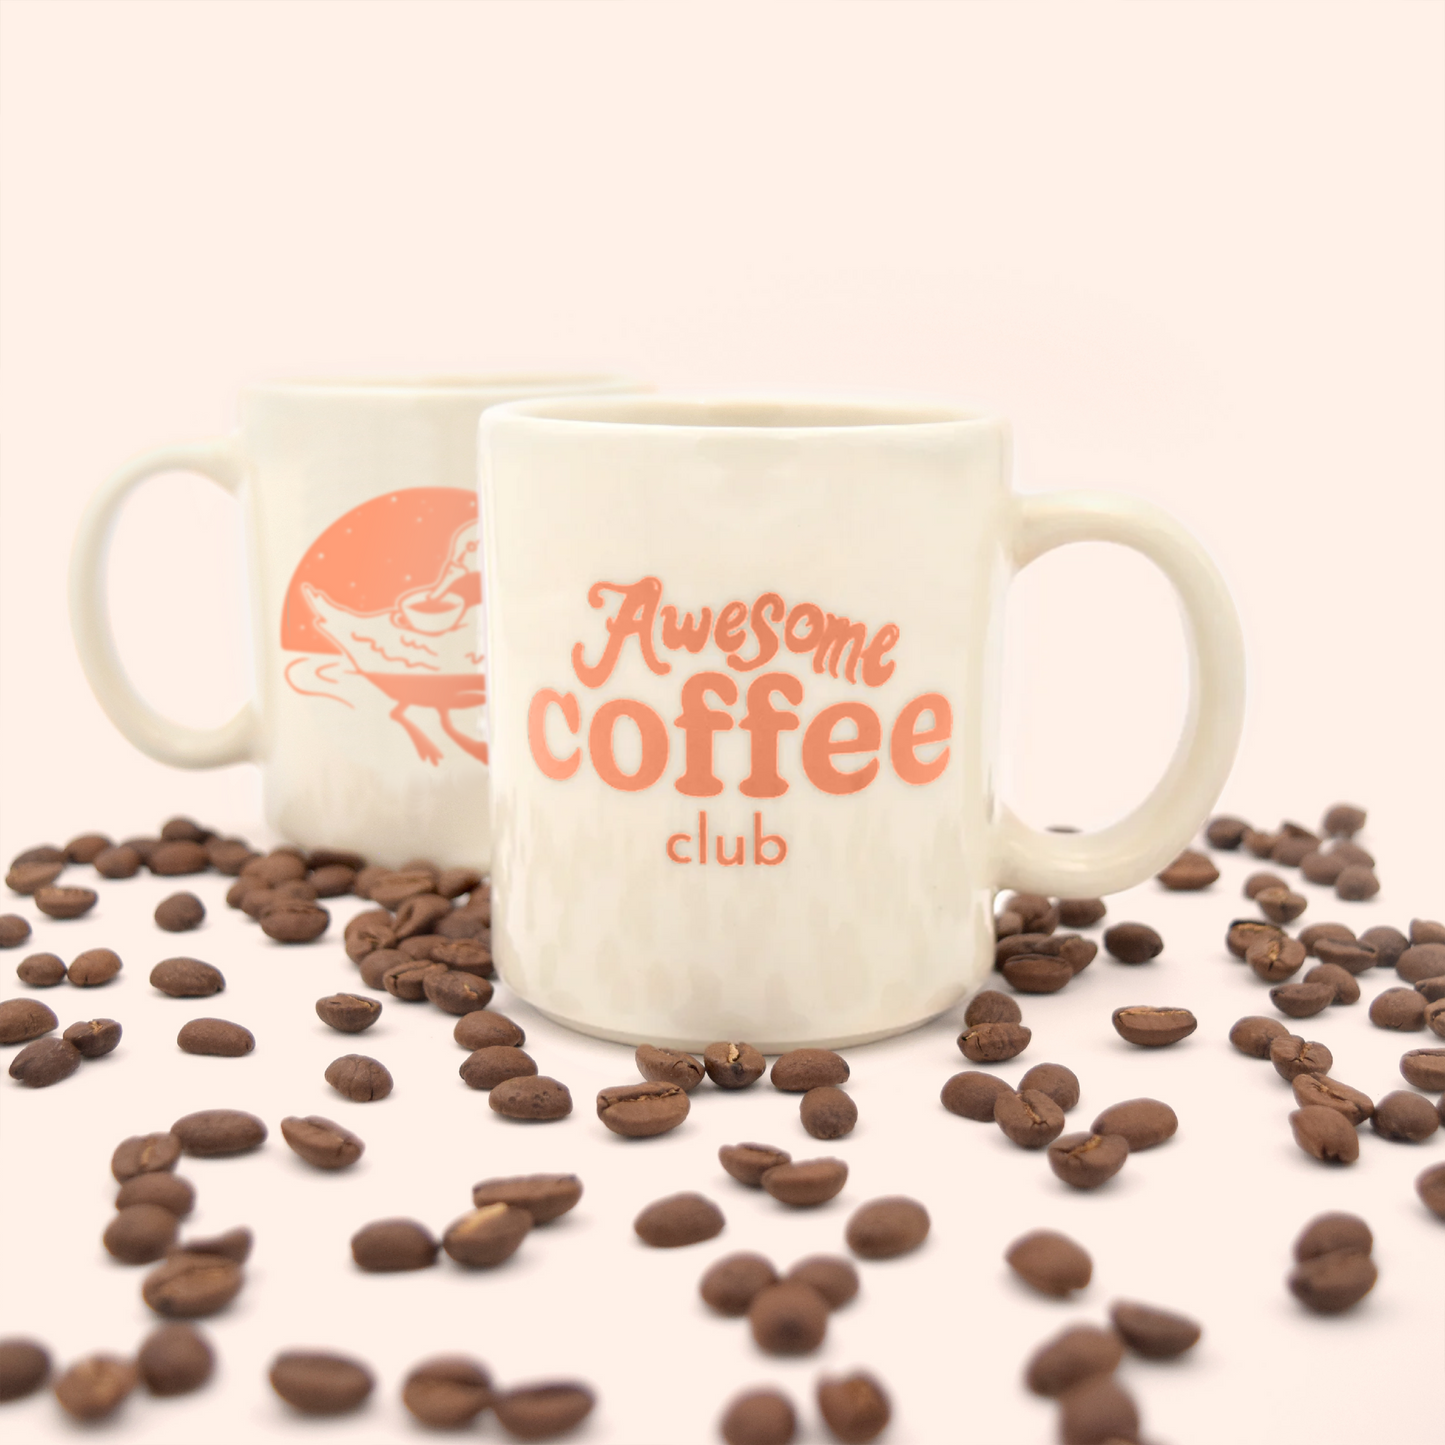 White cafe mug with the Awesome Coffee Club logo in orange written on the front. Behind the mug is a second mug with the outline of a duck drinking out of a cup, showing the back of the mug. Coffee beans surround both mugs. A Good Store subscription product. 